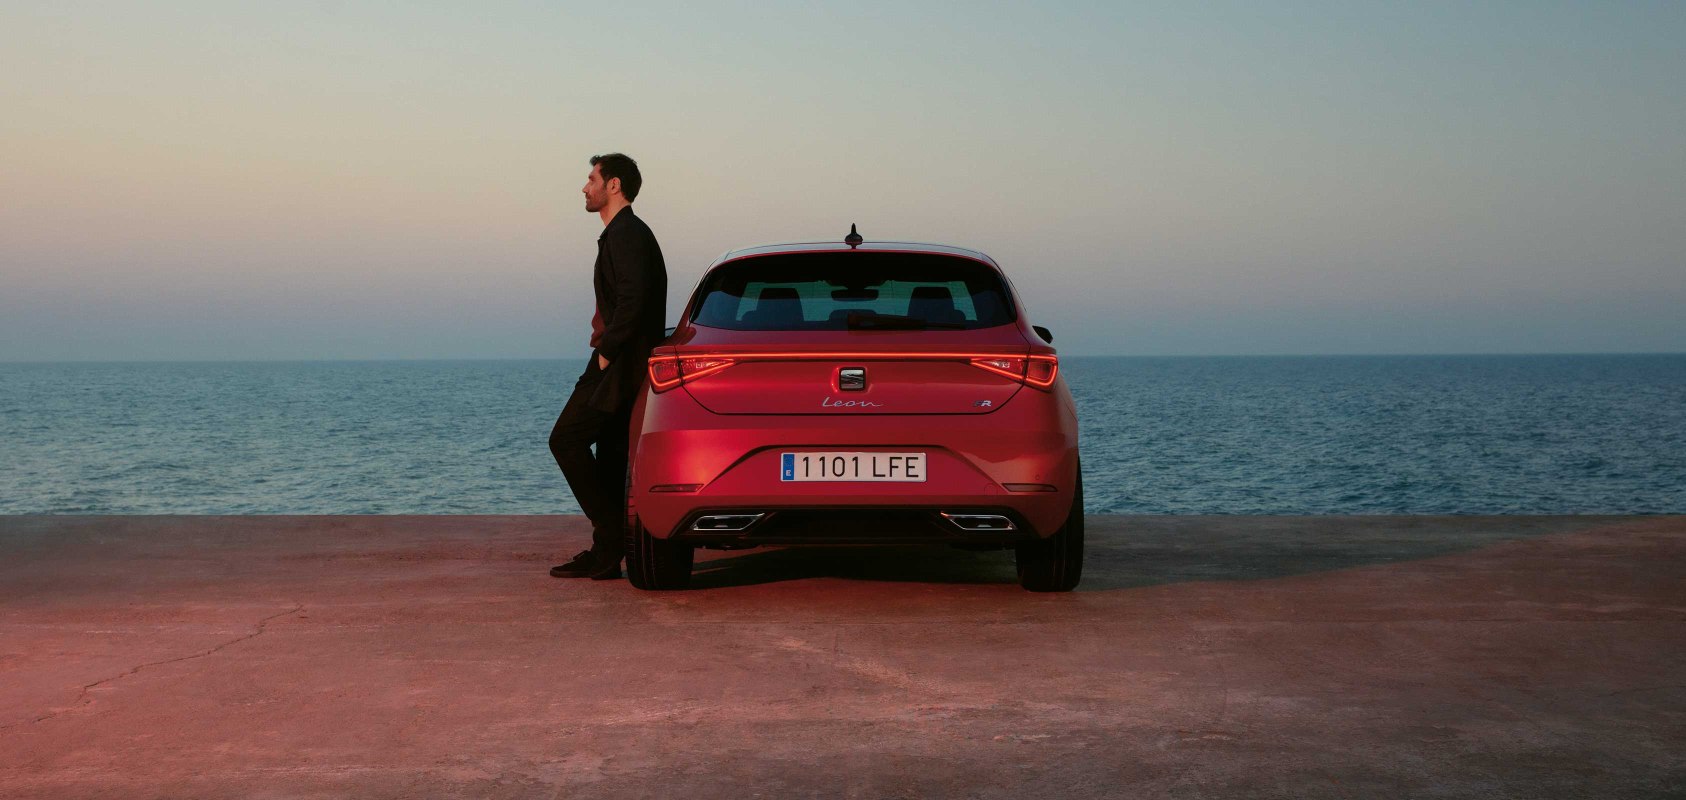 SEAT Leon desire red colour with the rear to rear coast lights